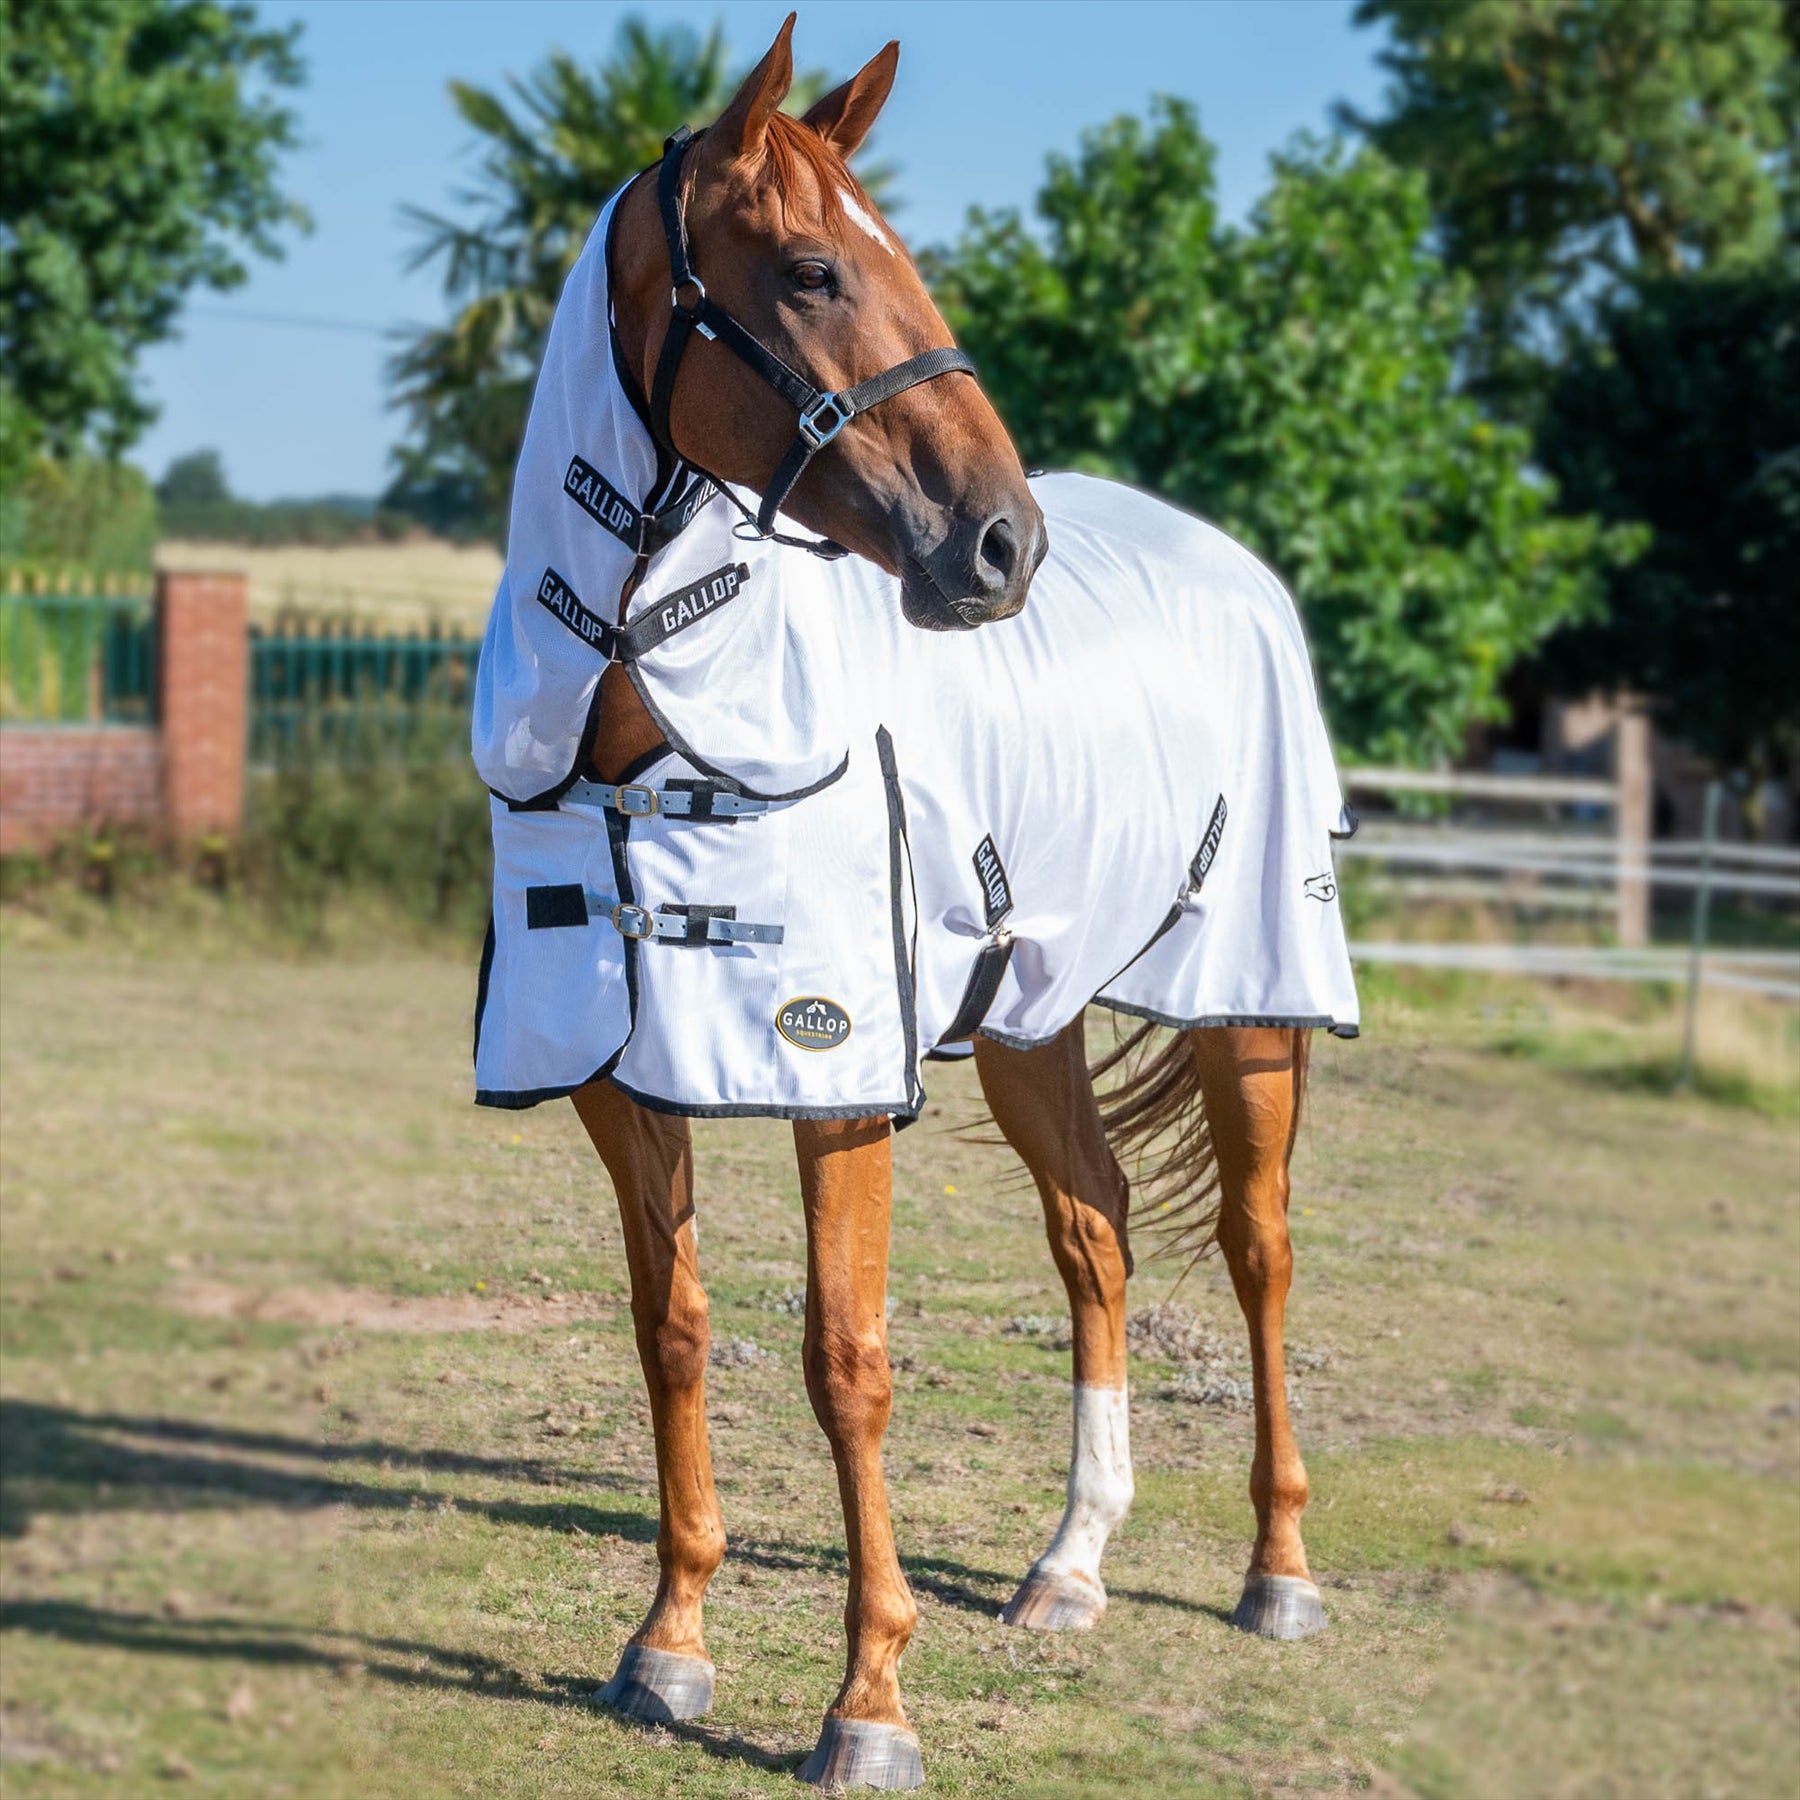 GALLOP EQUESTRIAN FLY MESH COMBO RUG for comprehensive fly protection